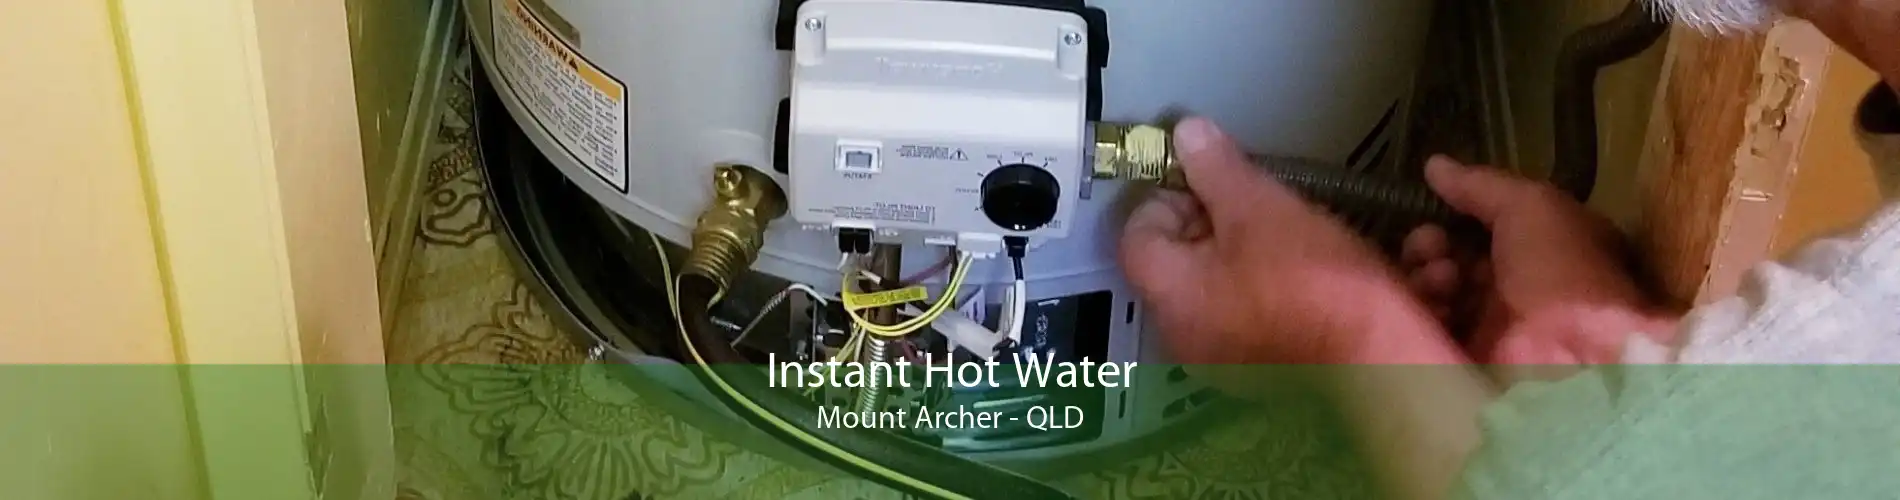 Instant Hot Water Mount Archer - QLD